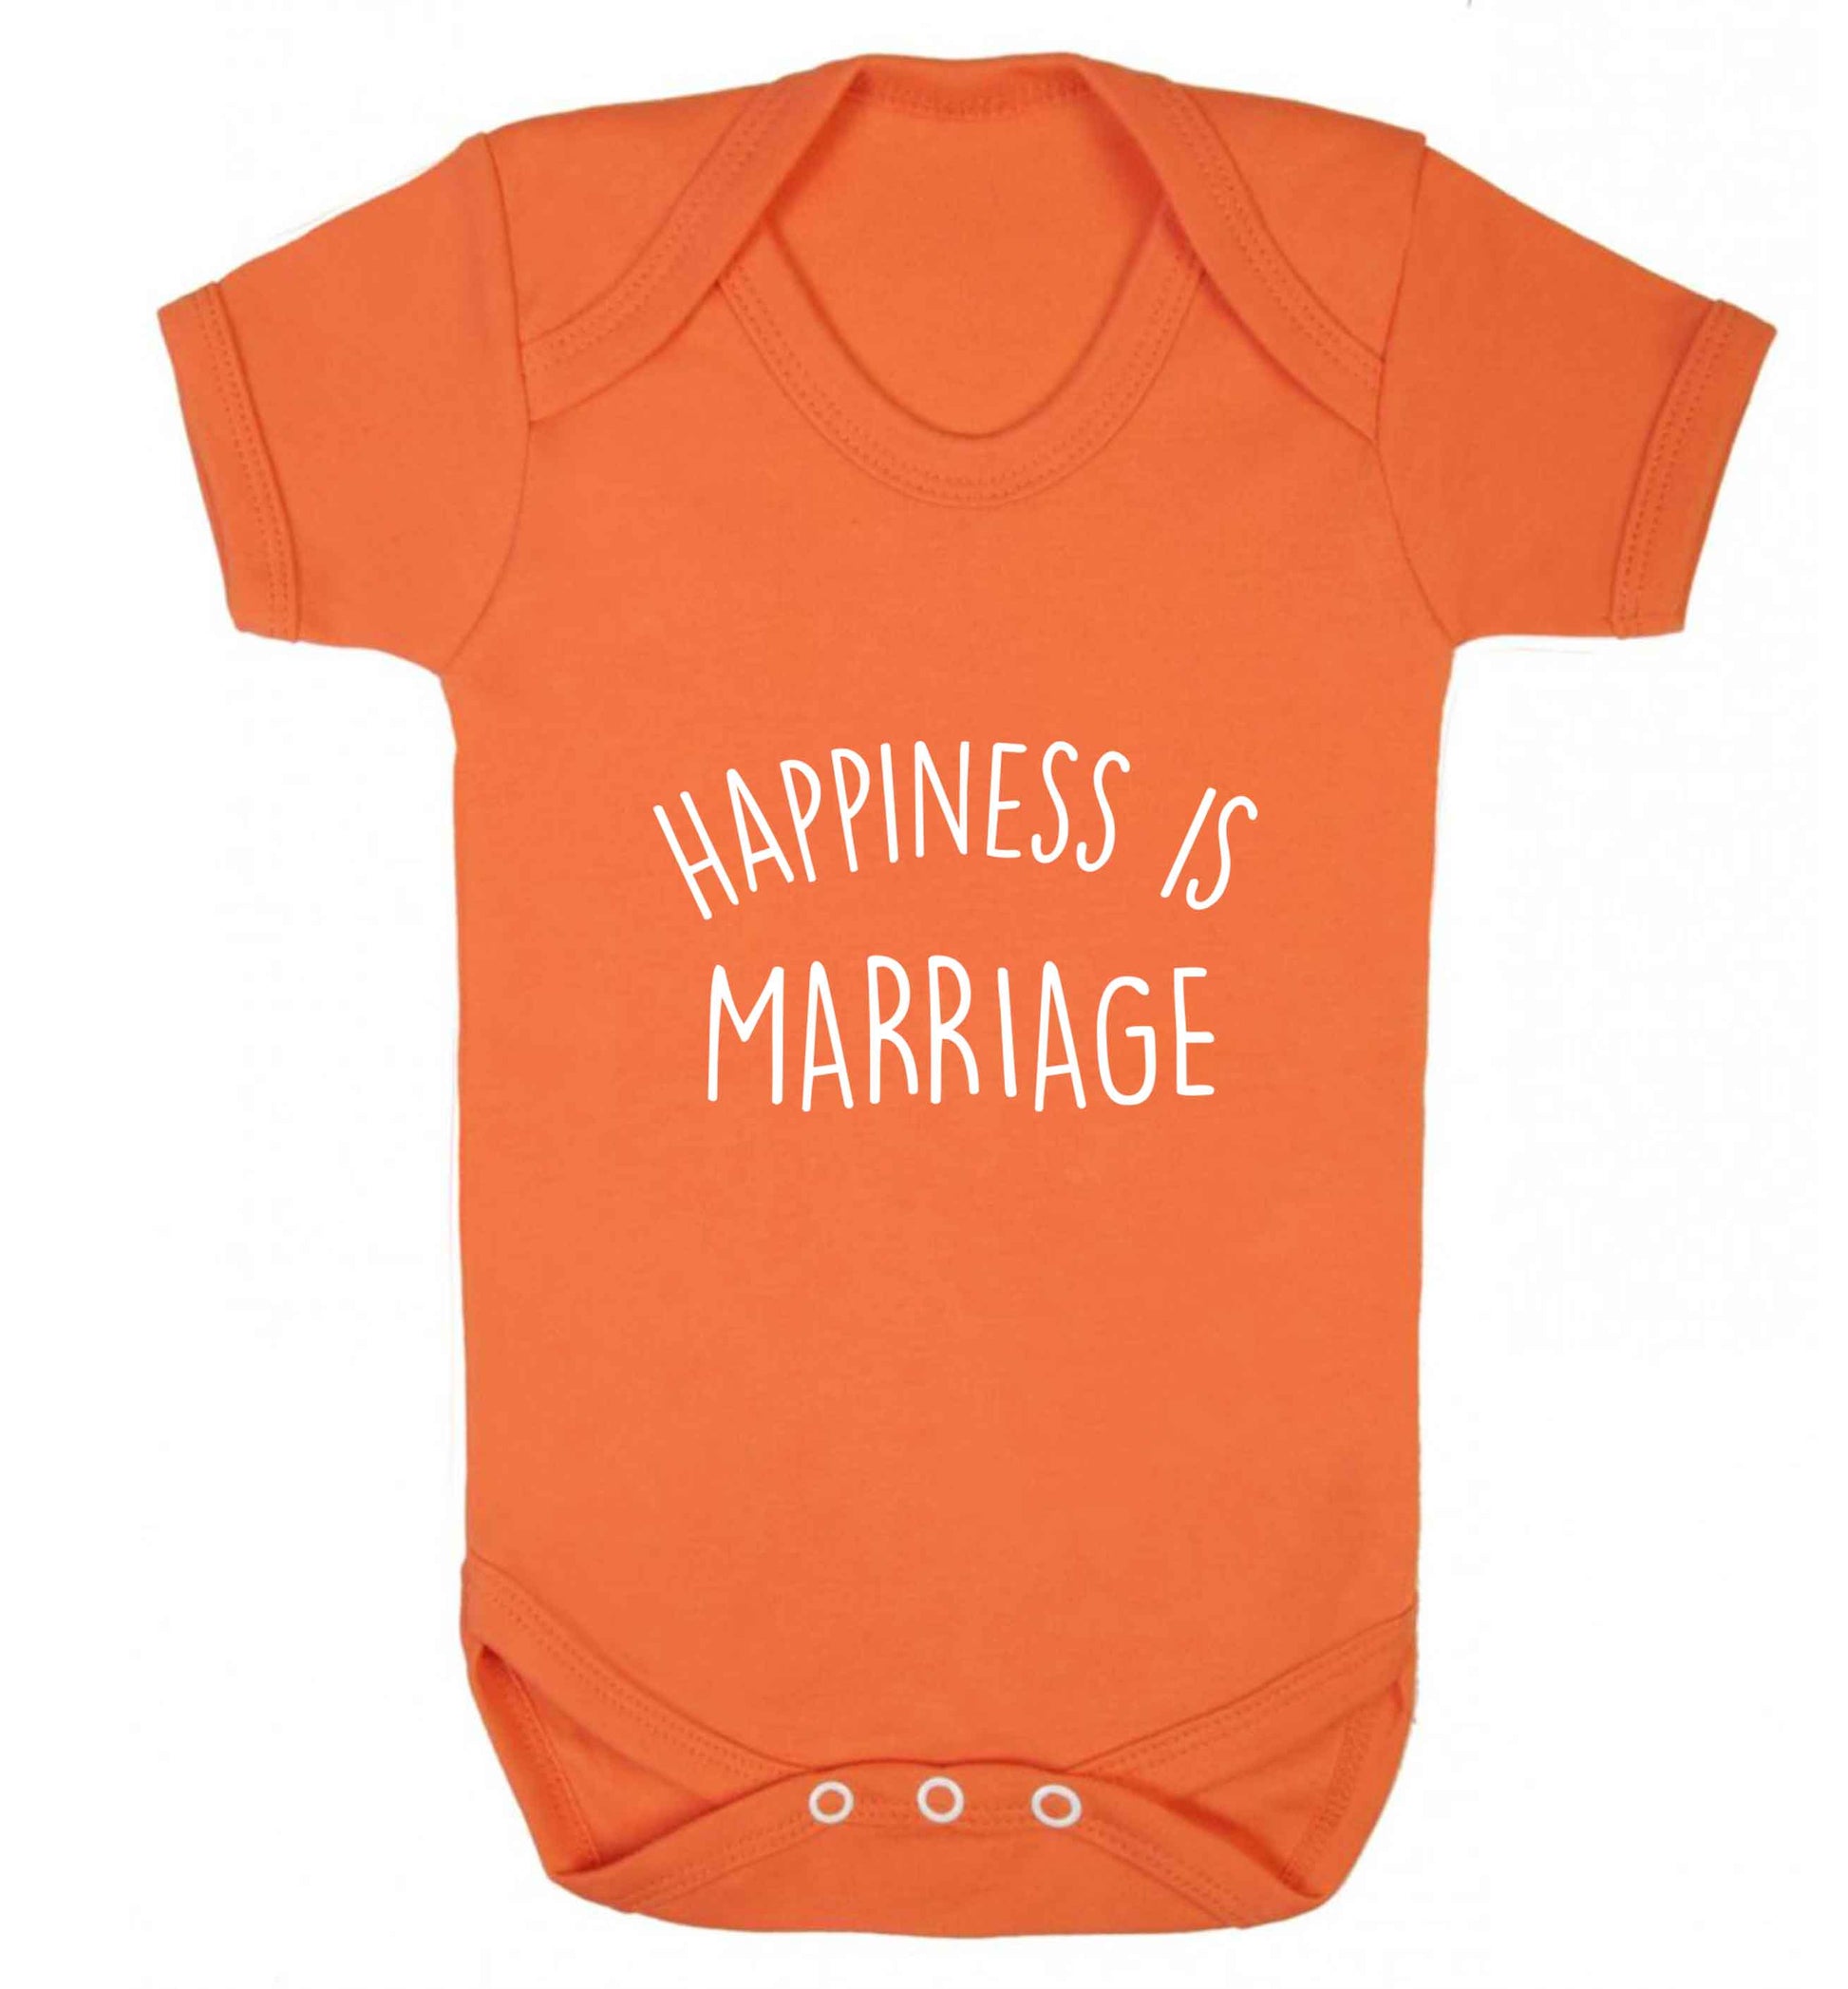 Happiness is marriage baby vest orange 18-24 months